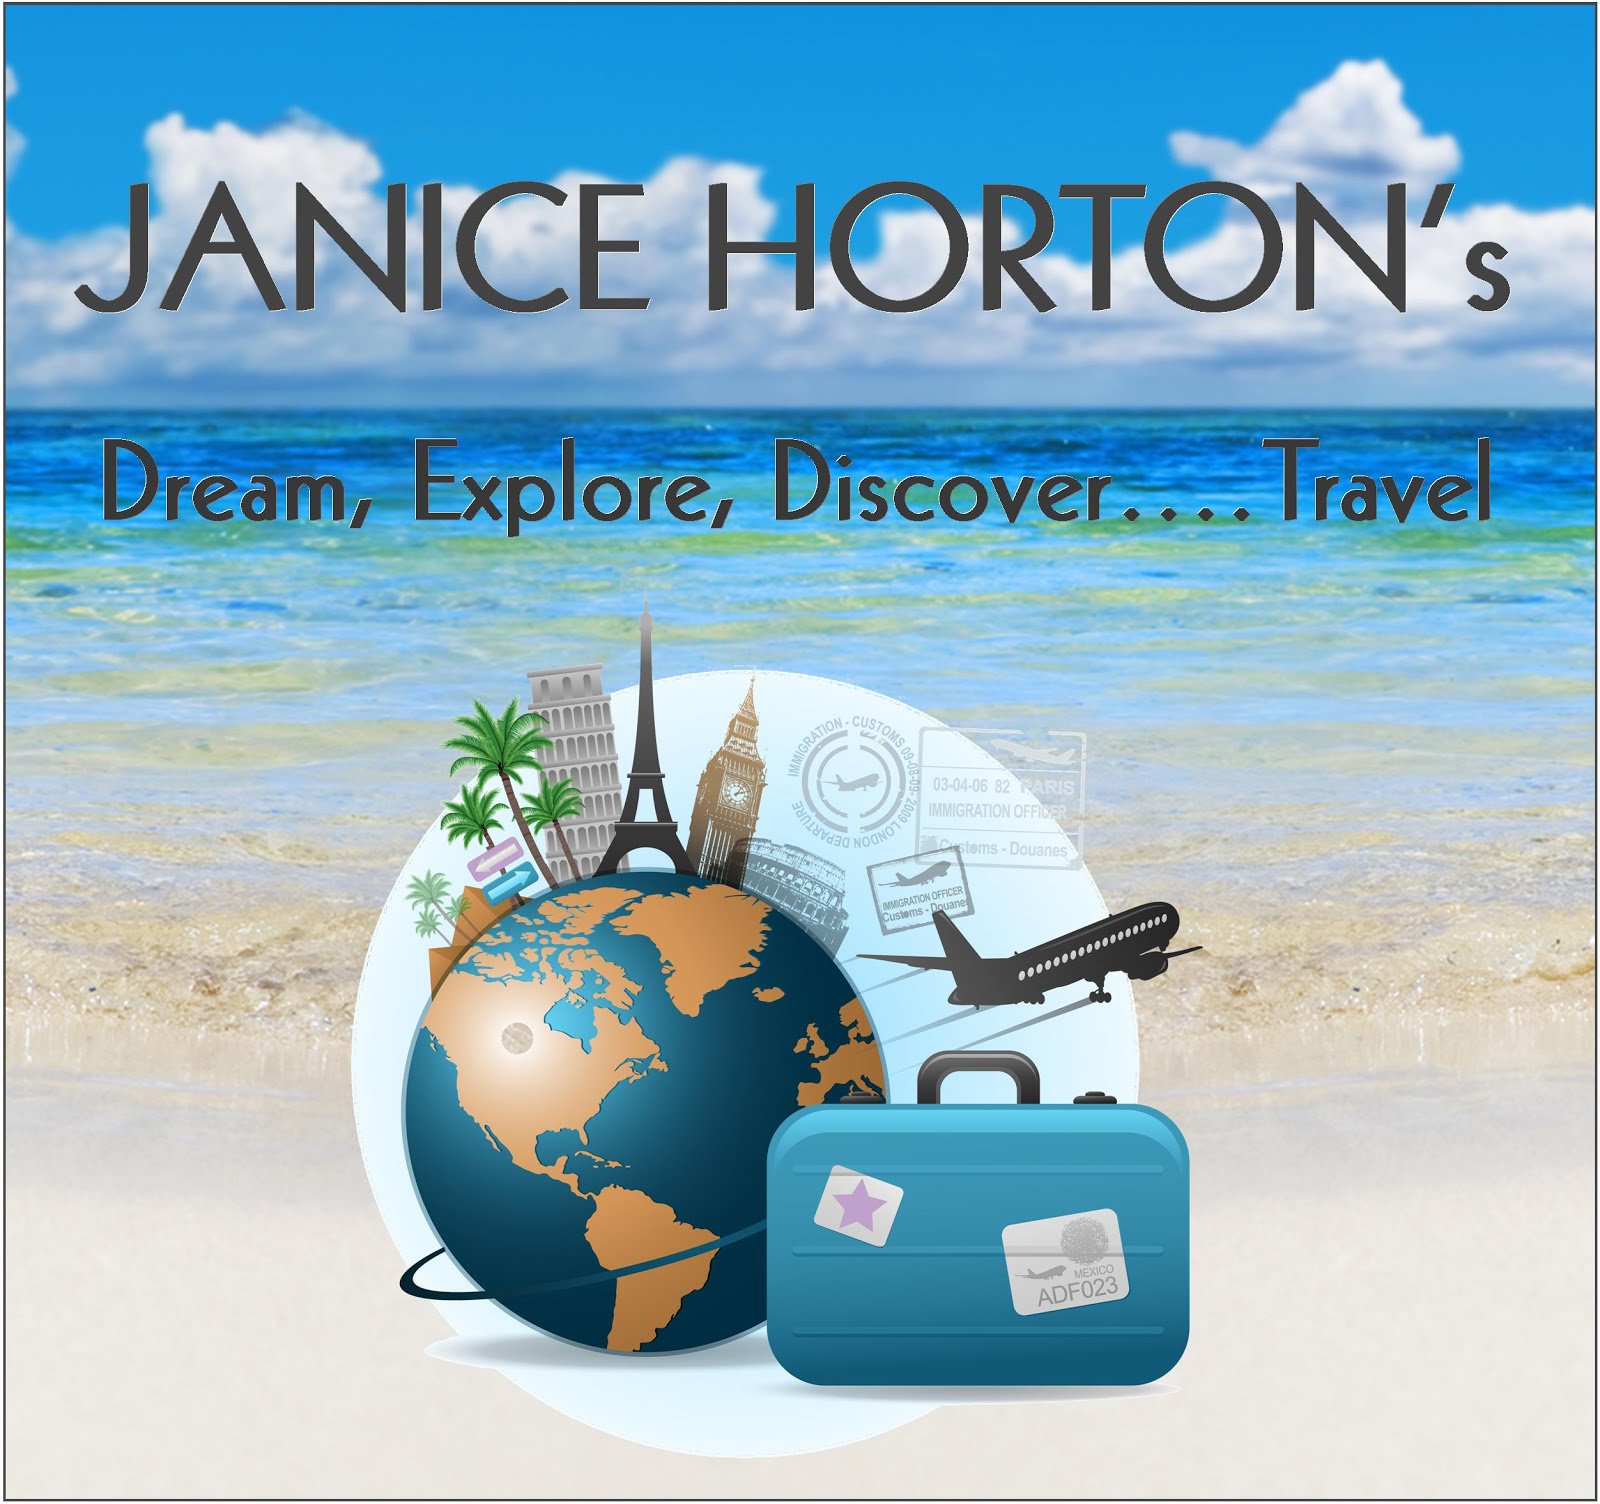 Dream, Explore, Discover...Travel! My NEW look travel feature for LLm Ezine!